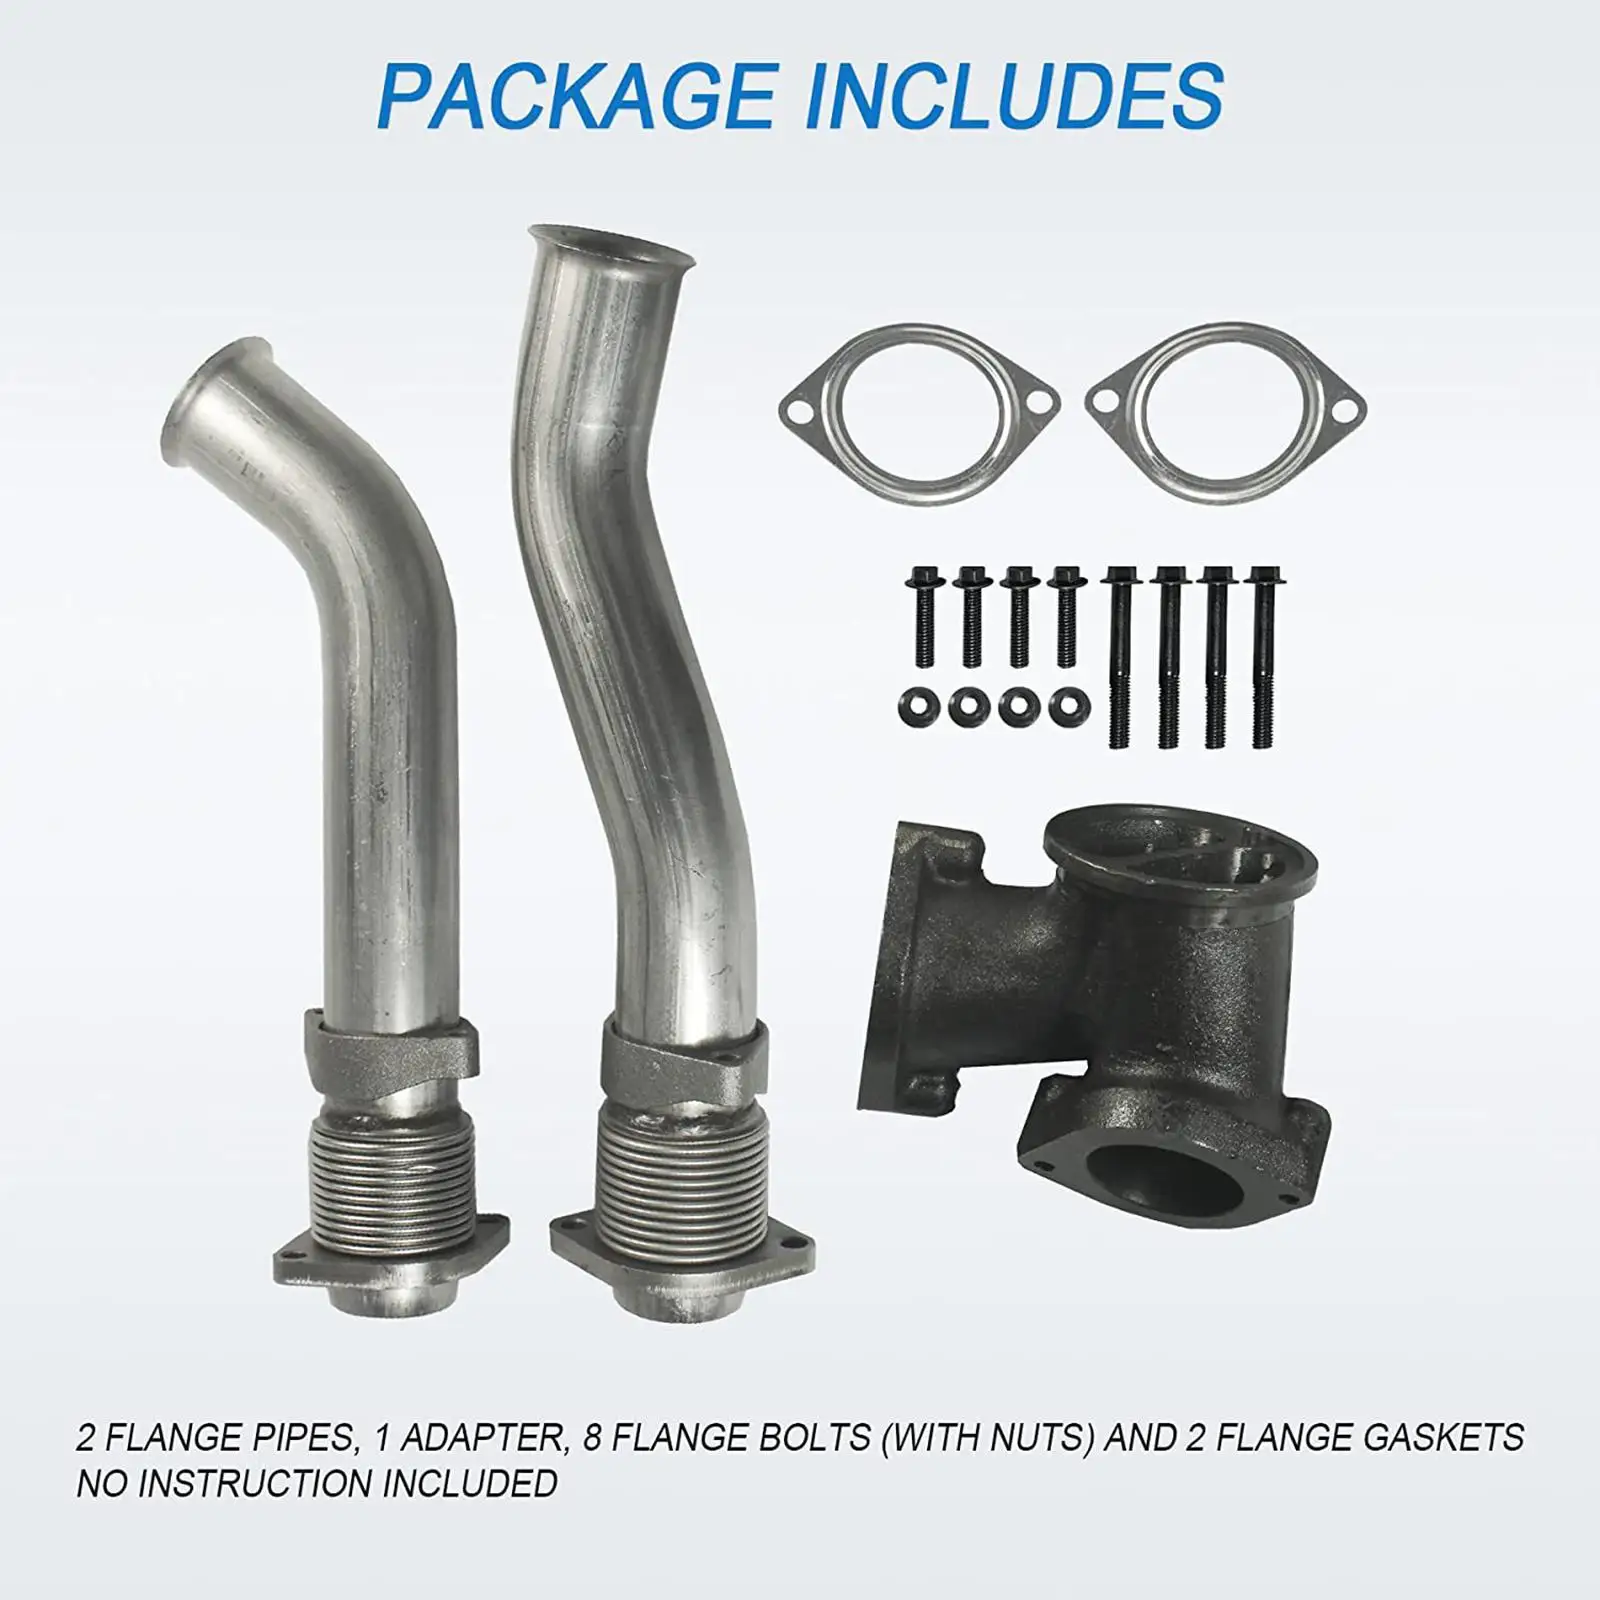 Turbocharger up Pipe Kit 679-005 Car Accessory for Ford F-450 F-350